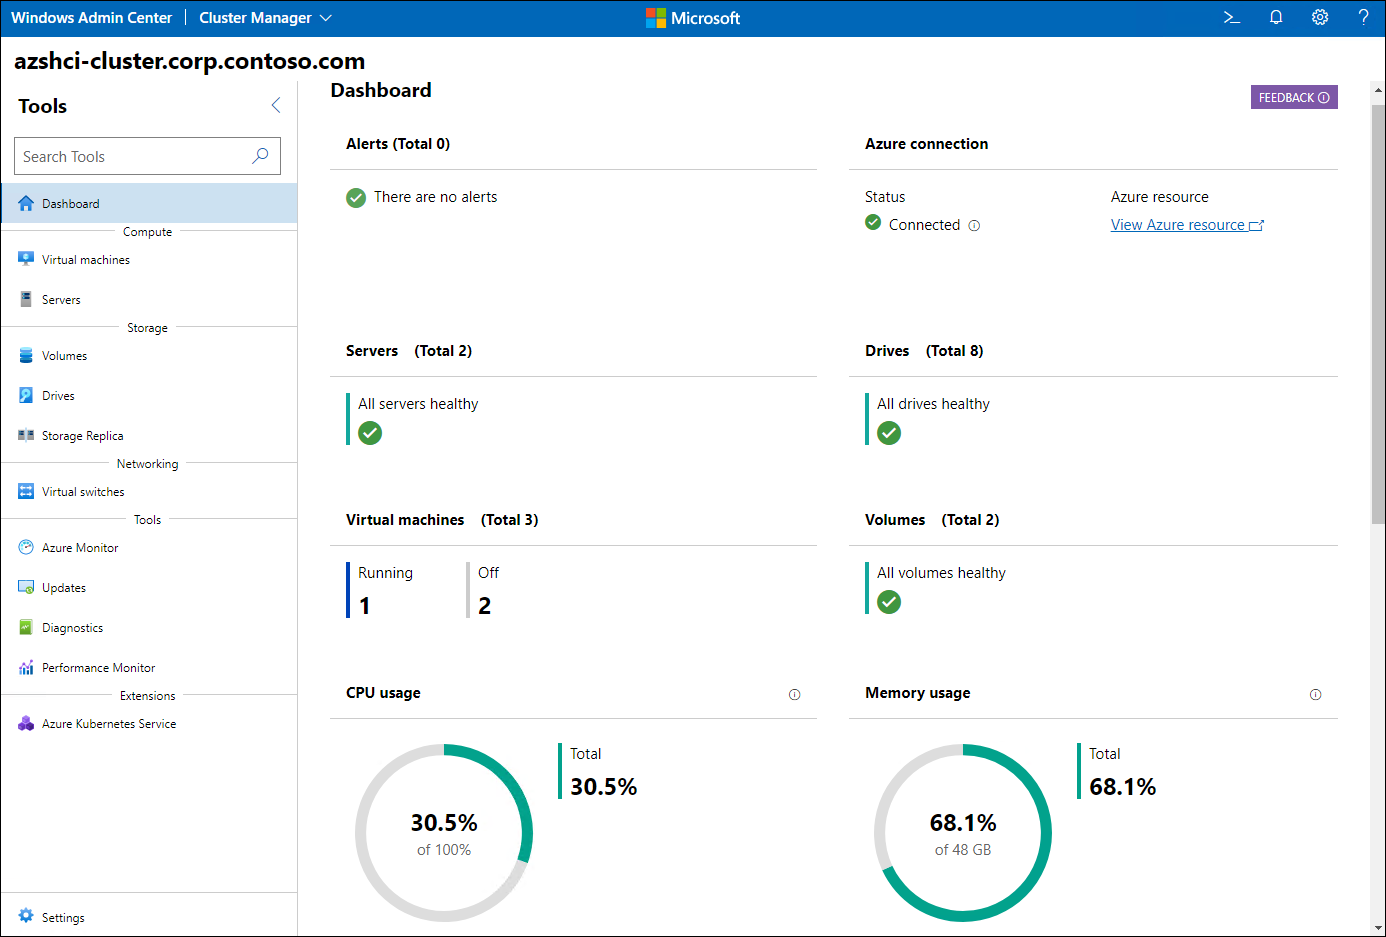 The screenshot depicts the Windows Admin Center dashboard displaying information about the status and performance of a cluster.